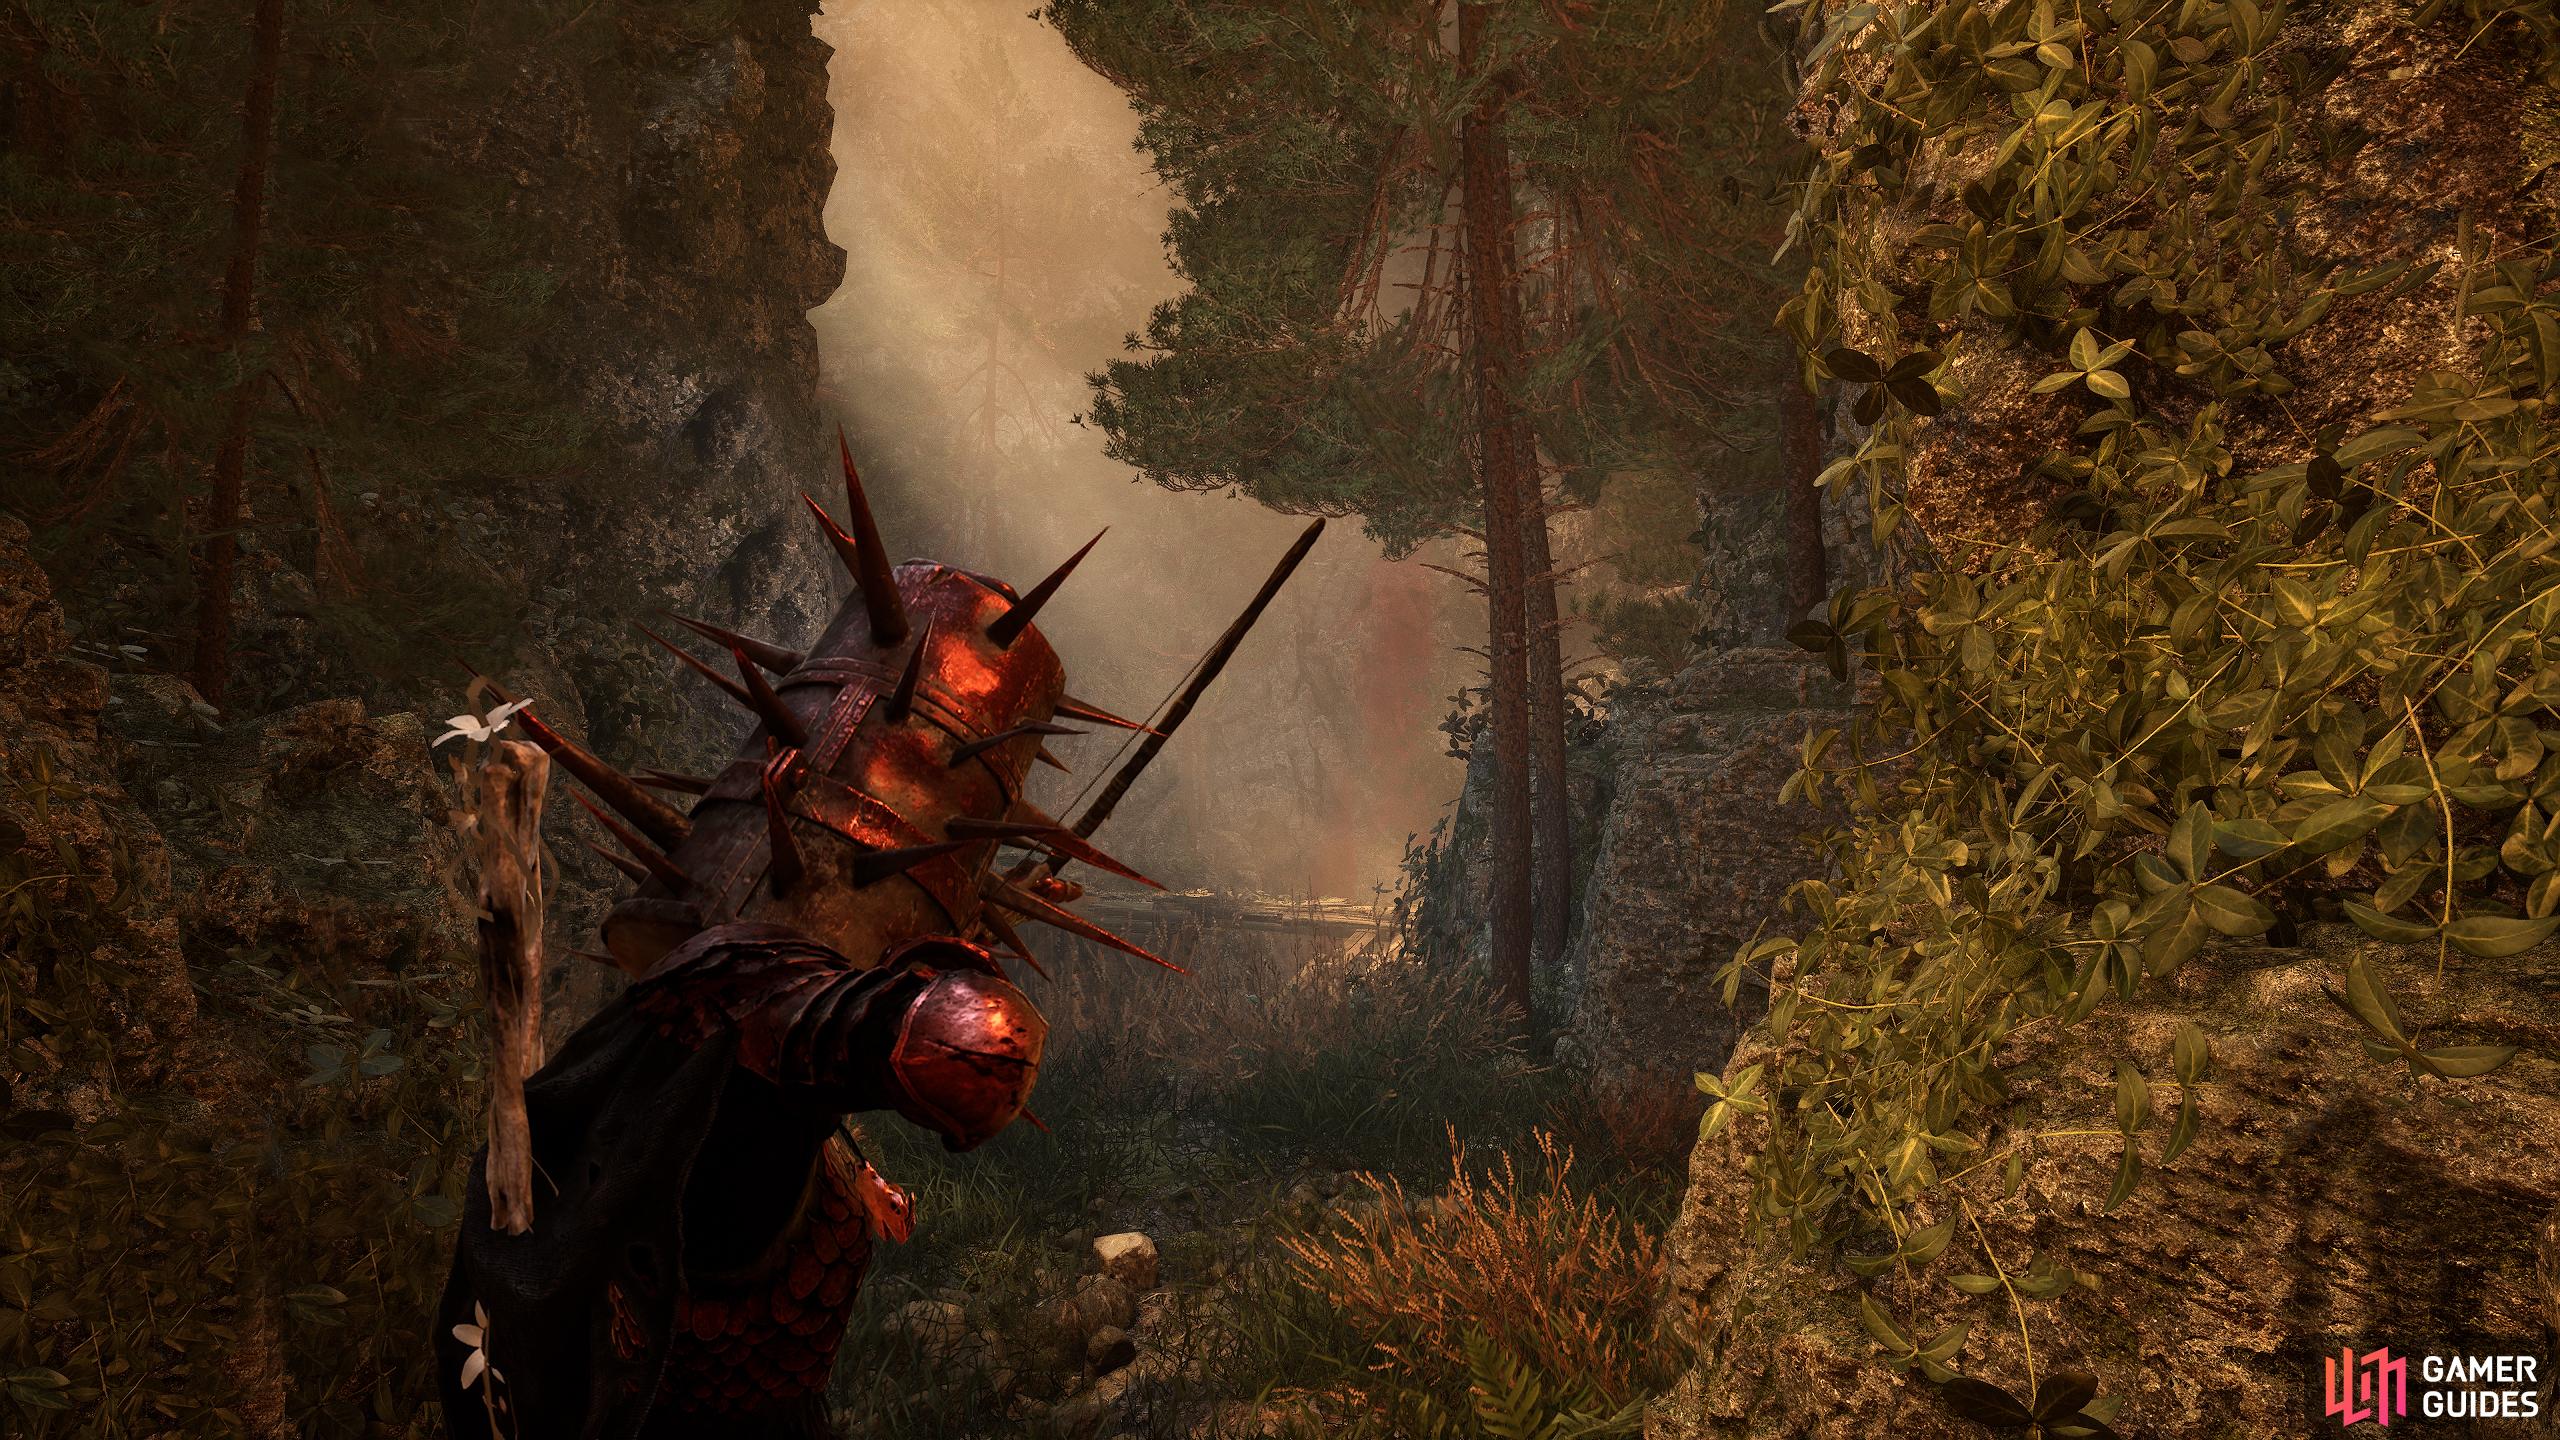 There are many ways to attack enemies at range in Lords of the Fallen, and a Bow is just one of them.